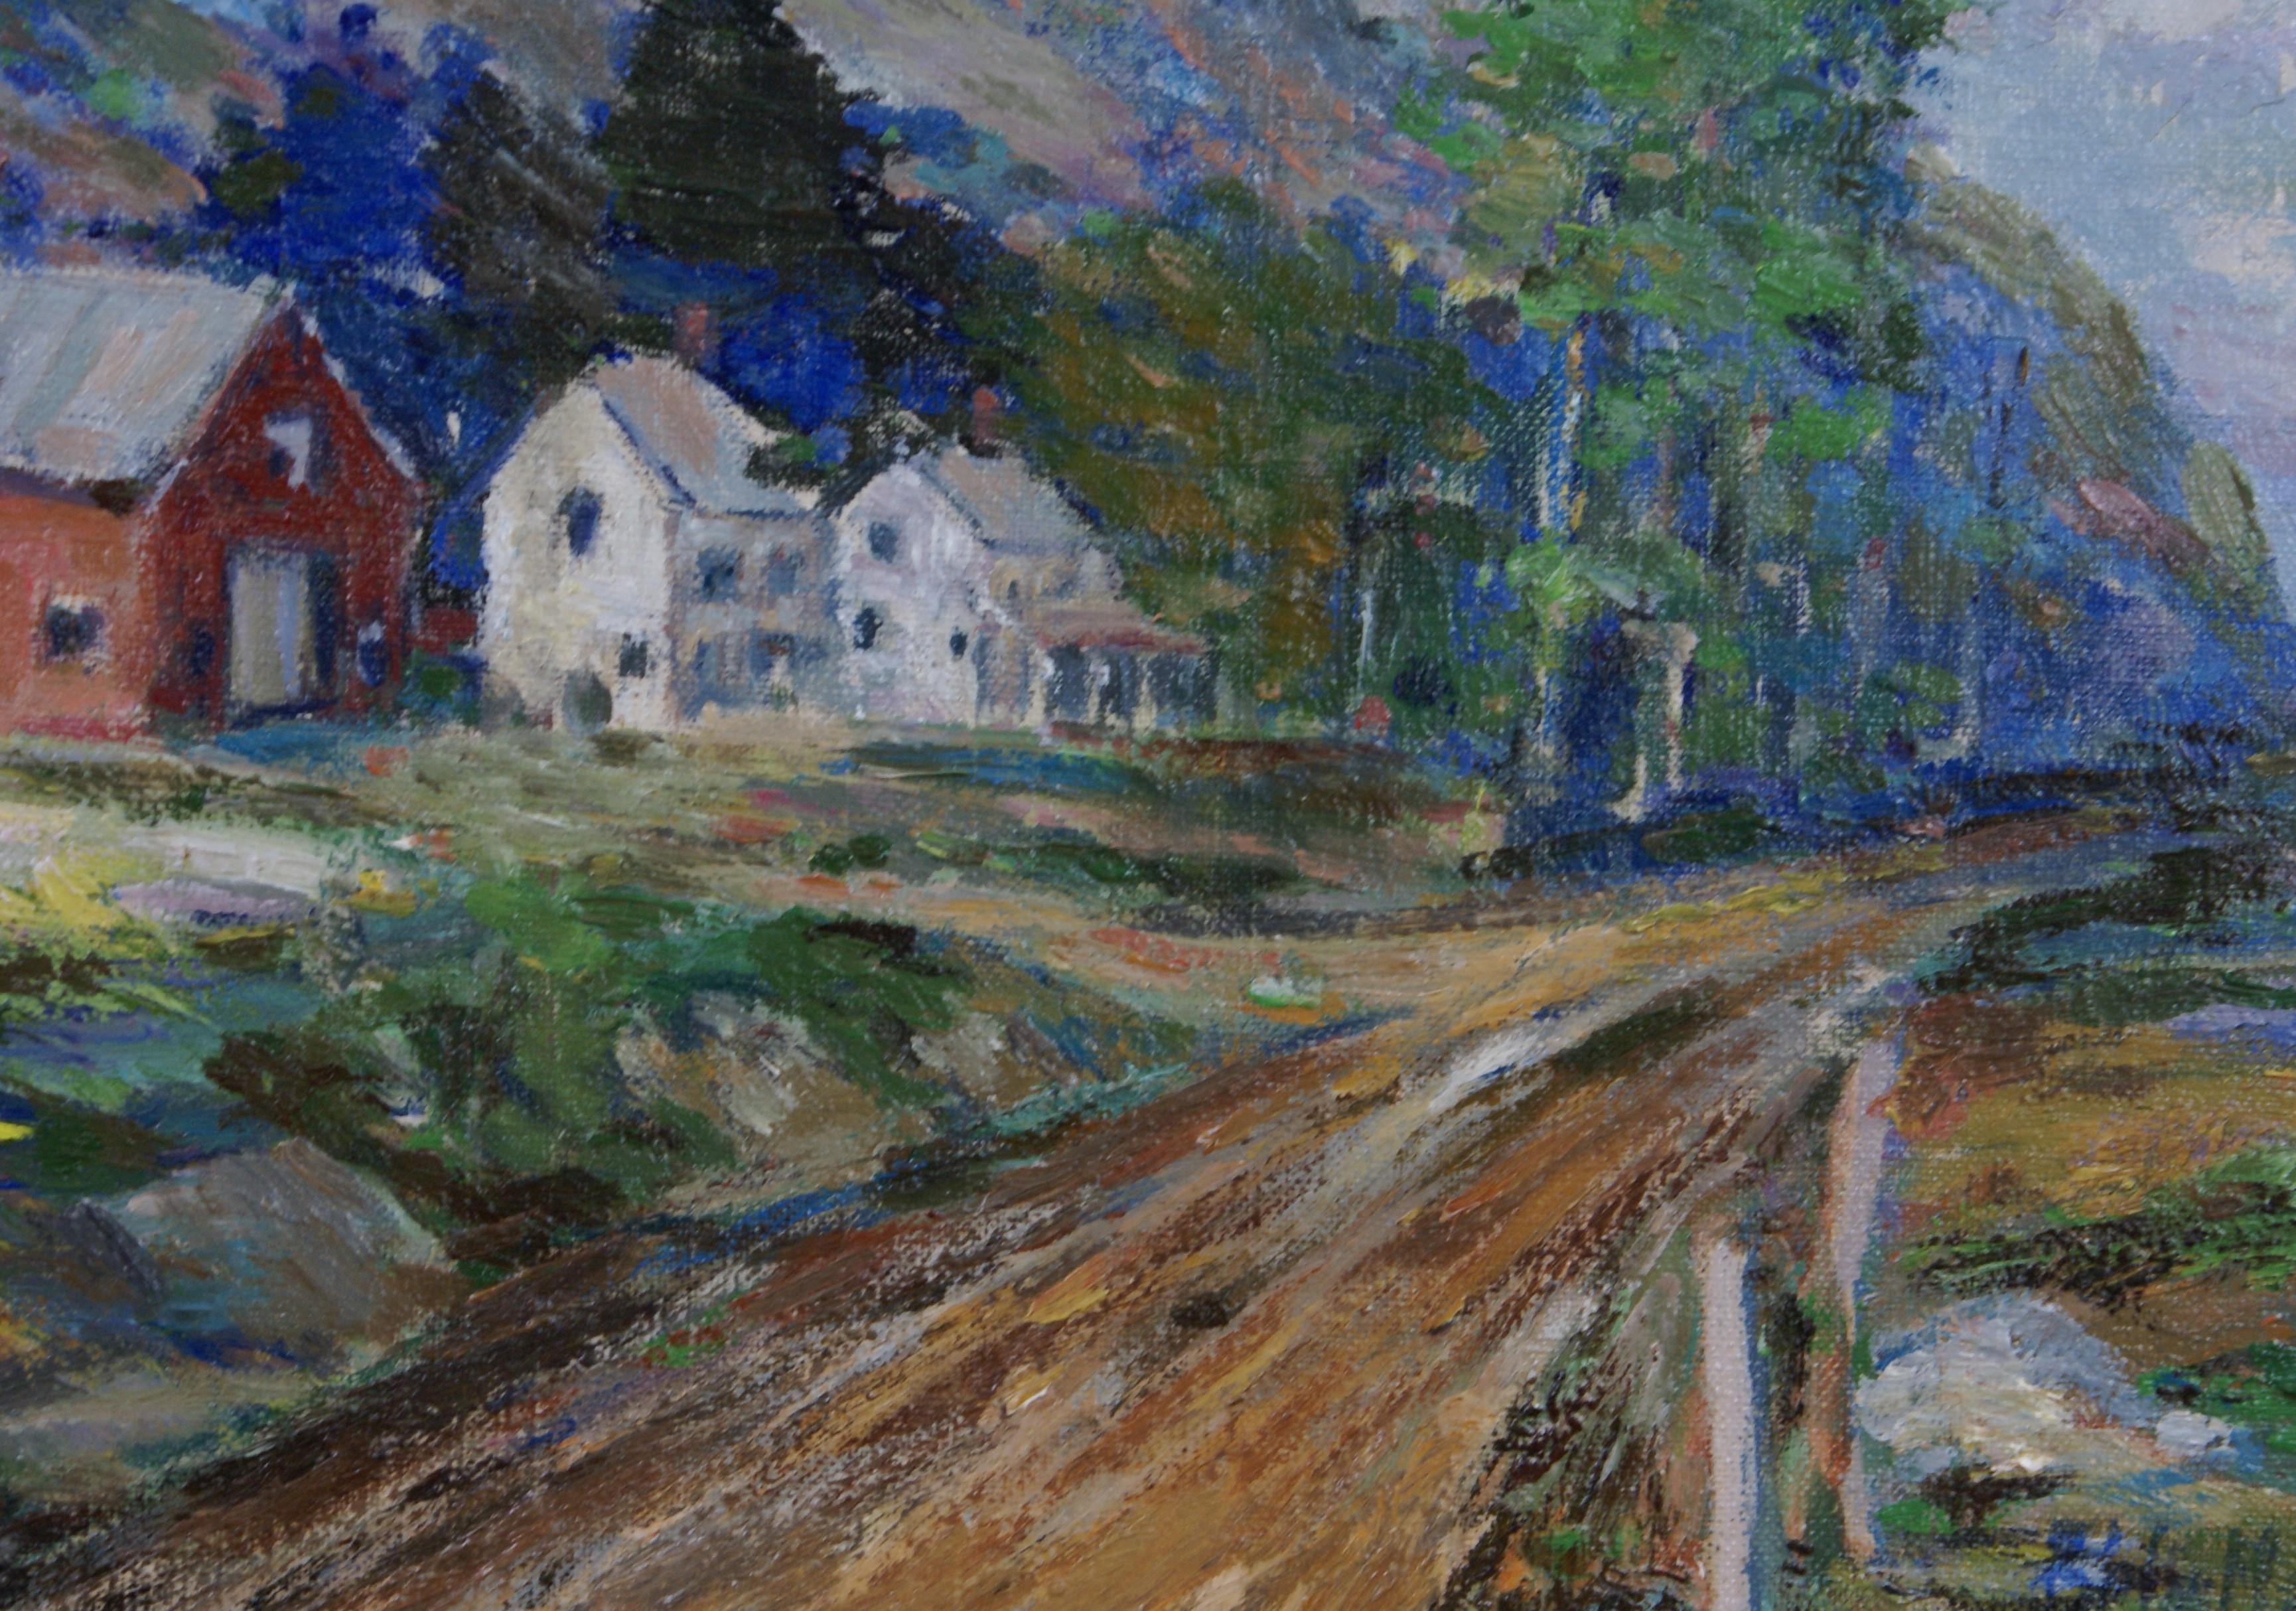 New Hampshire - Gray Abstract Painting by Peter Bela Mayer